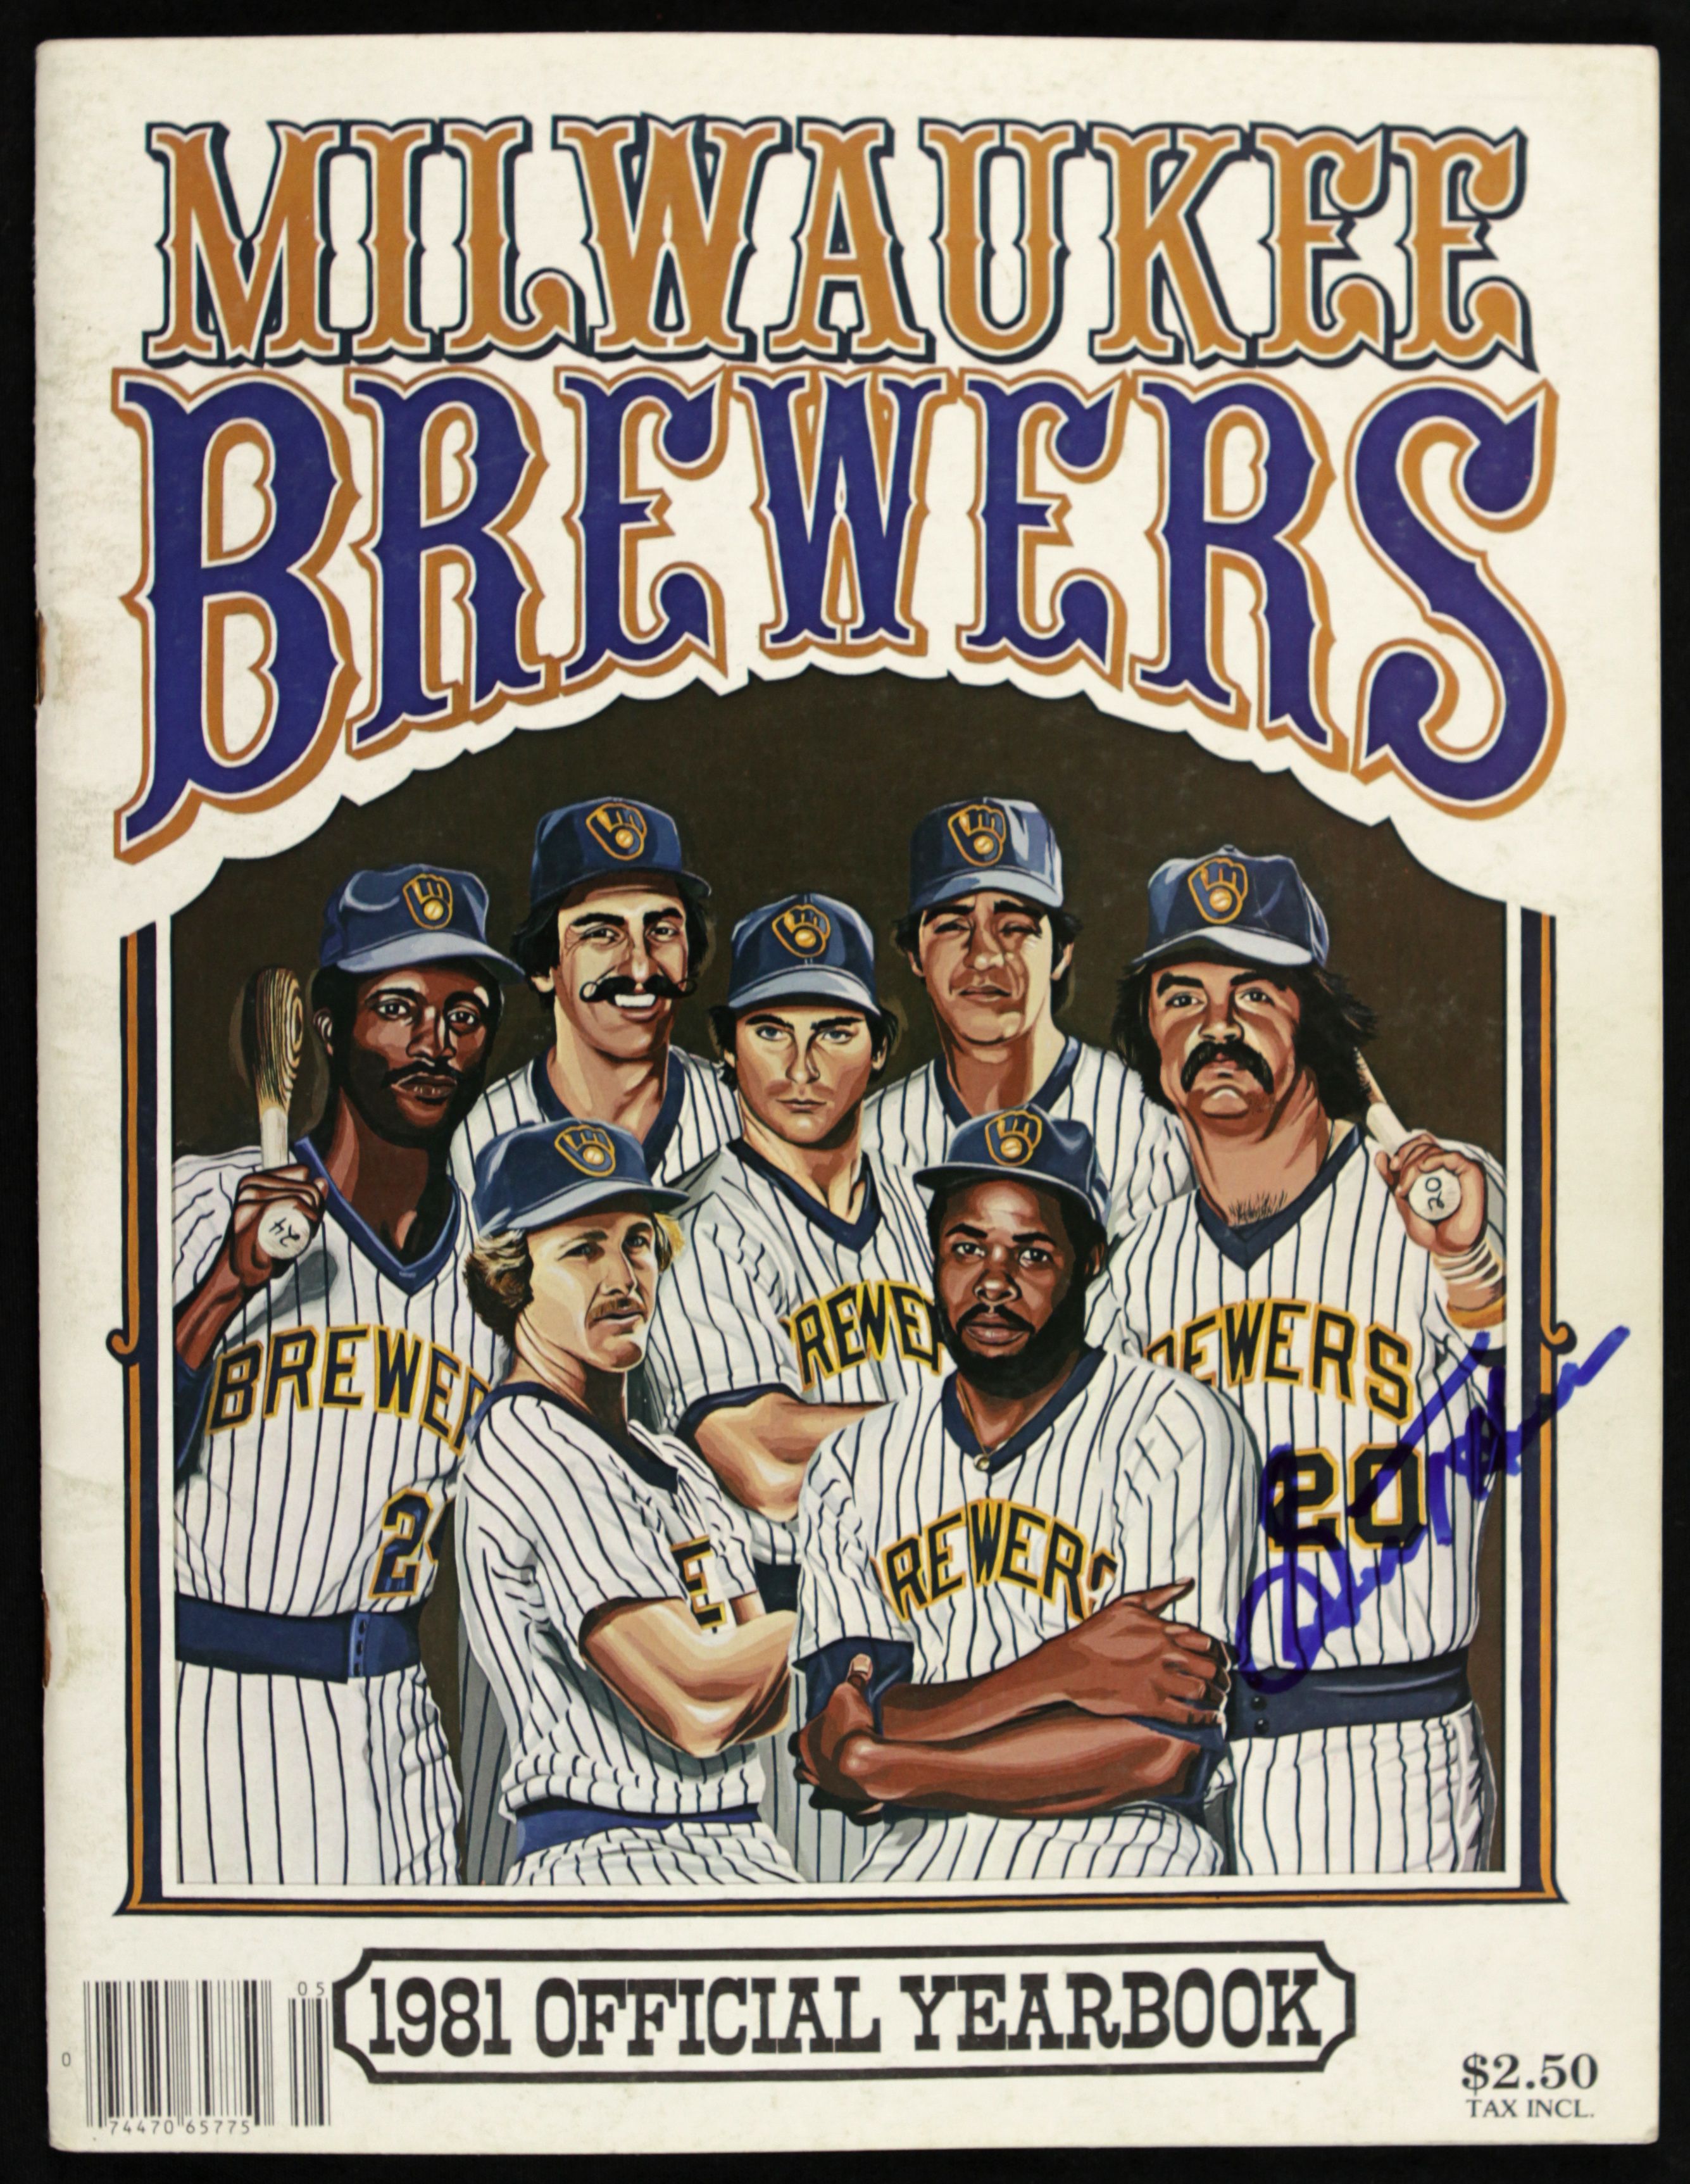 The Brewers Yearbook is now available - Milwaukee Brewers